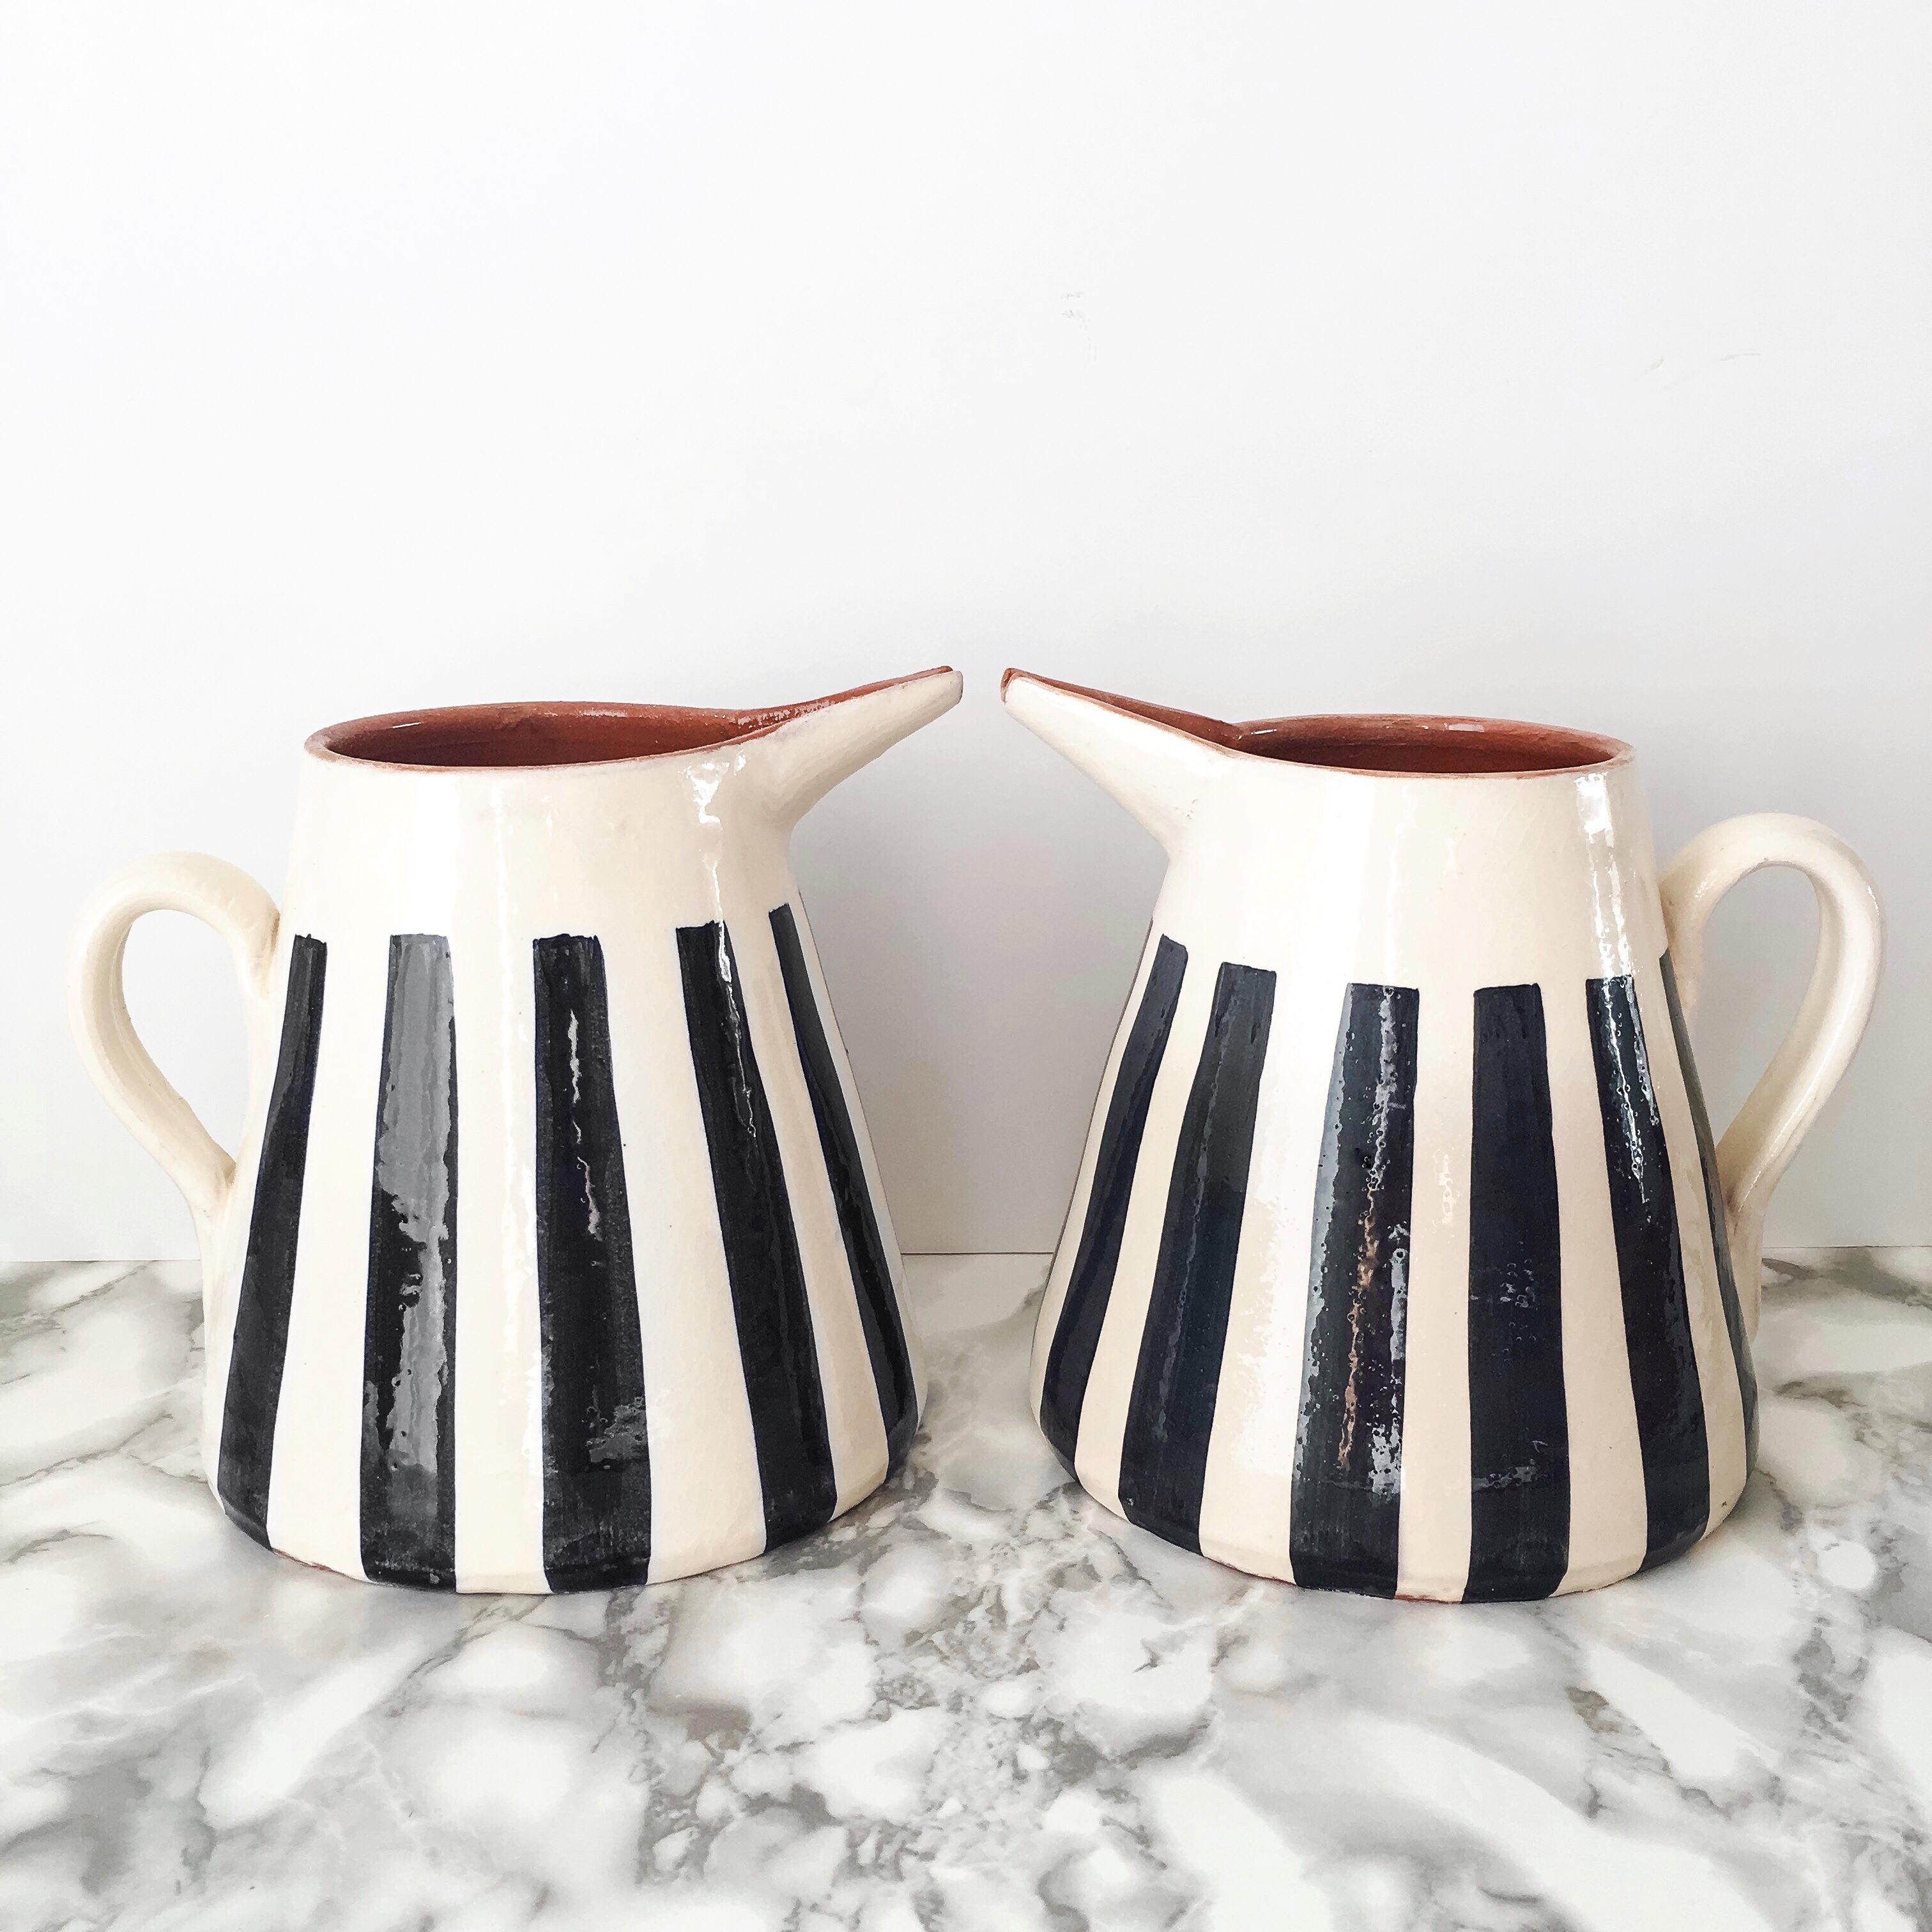 Contemporary Handmade Ceramic Small Pitcher with Graphic Black and White Design, in Stock